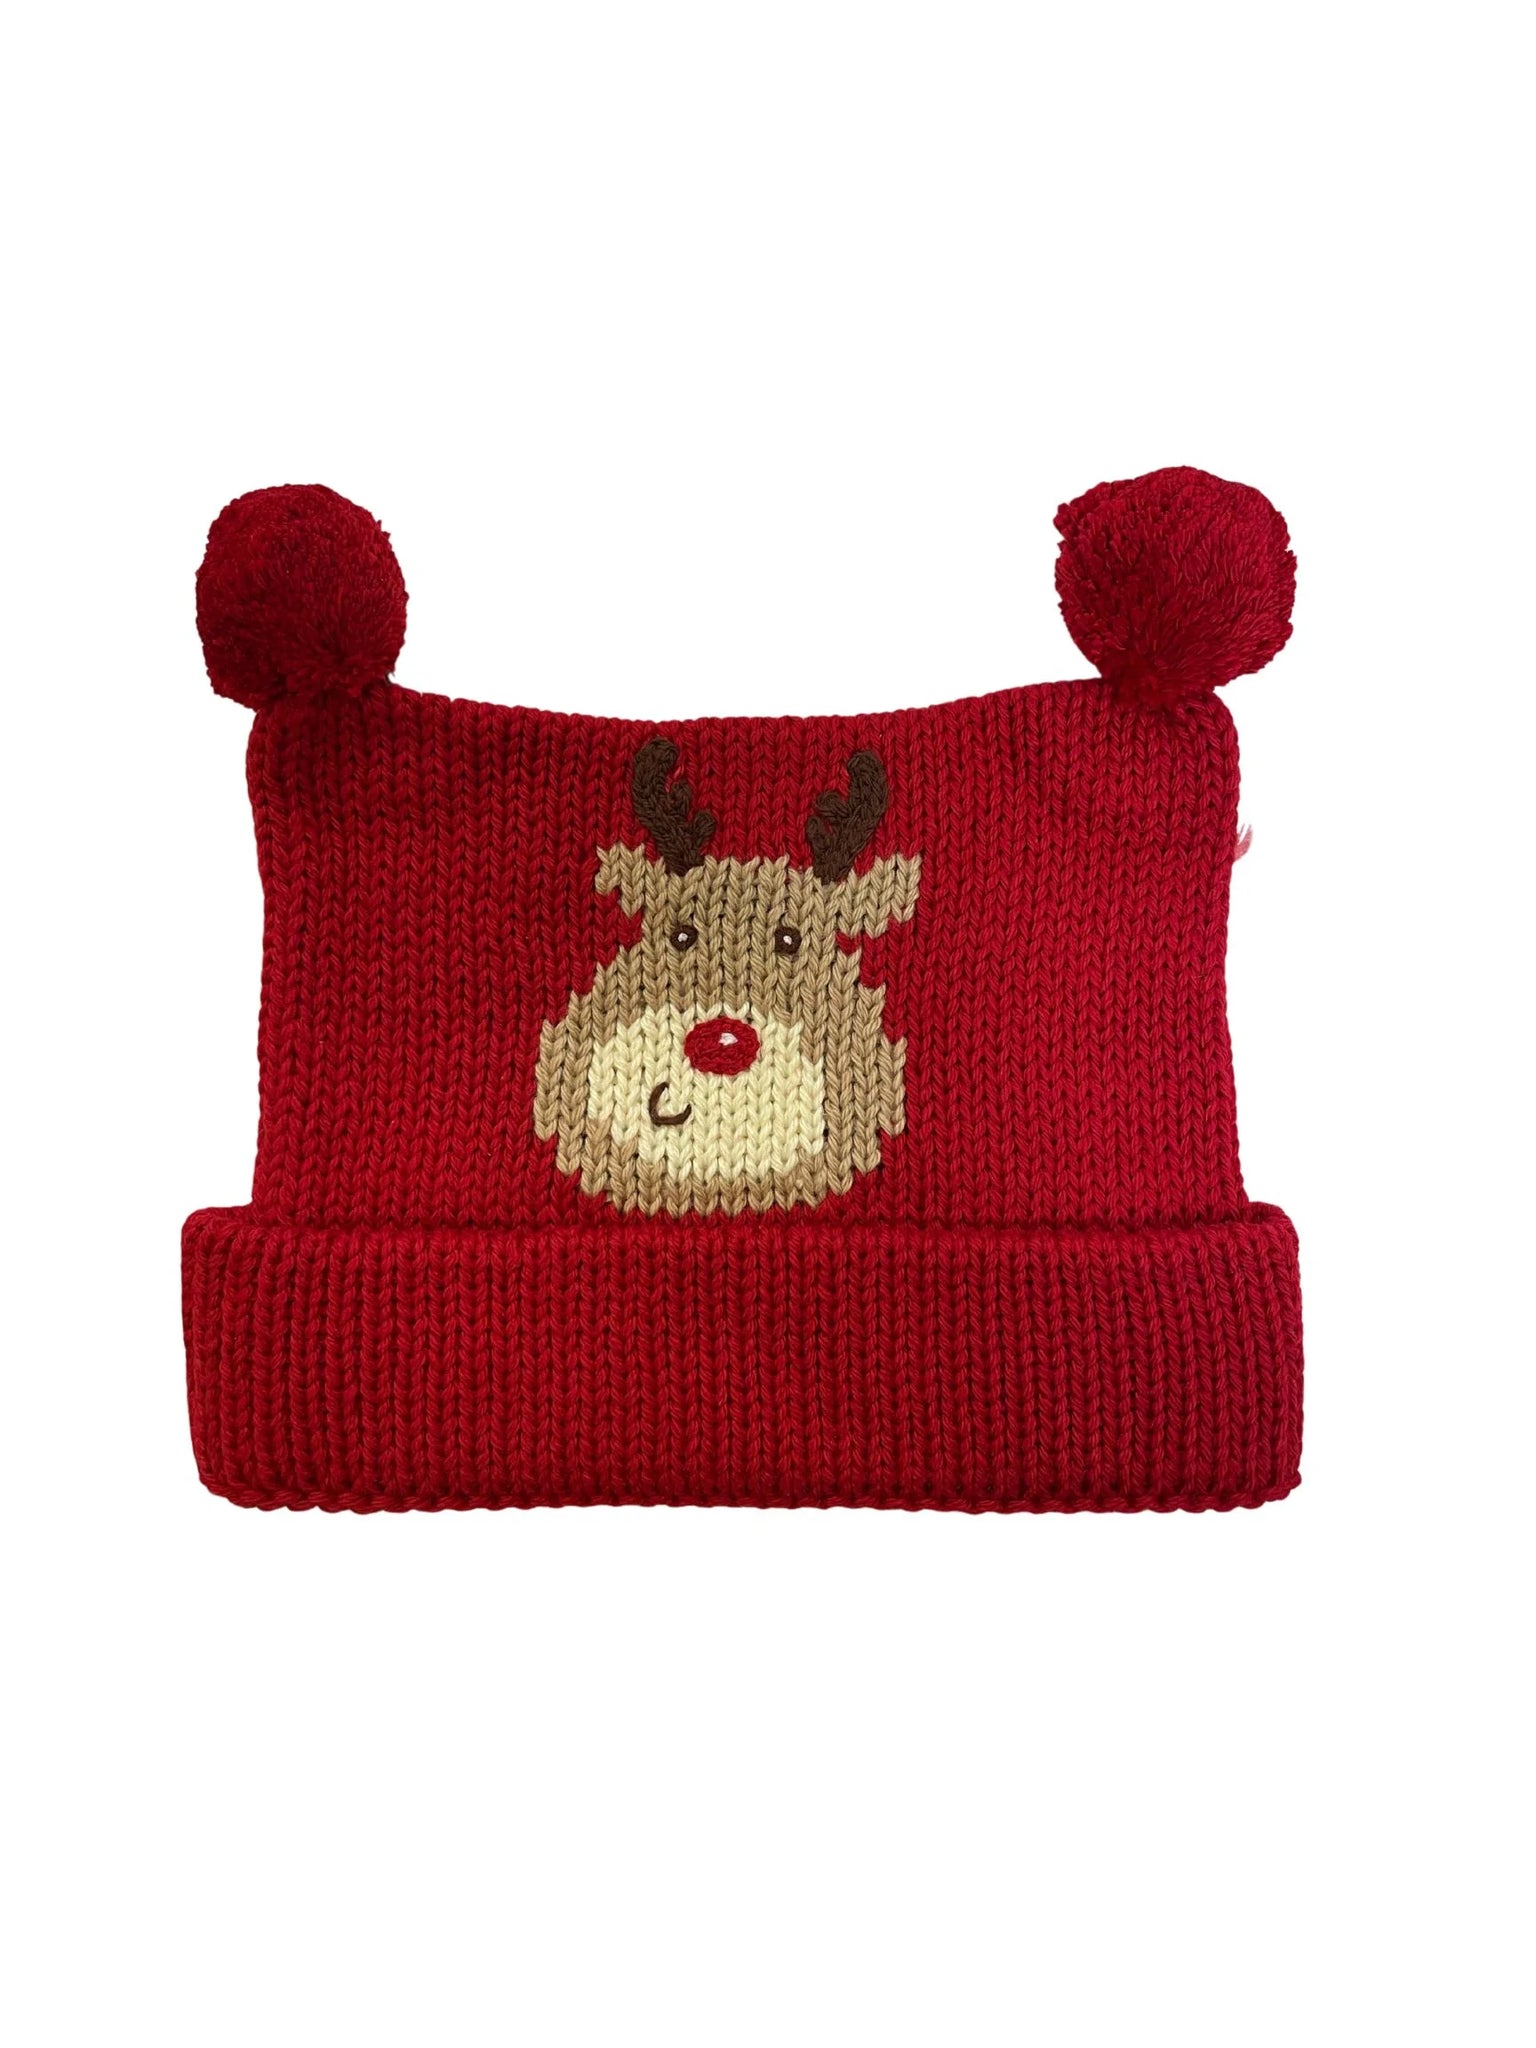 red rudolph hat